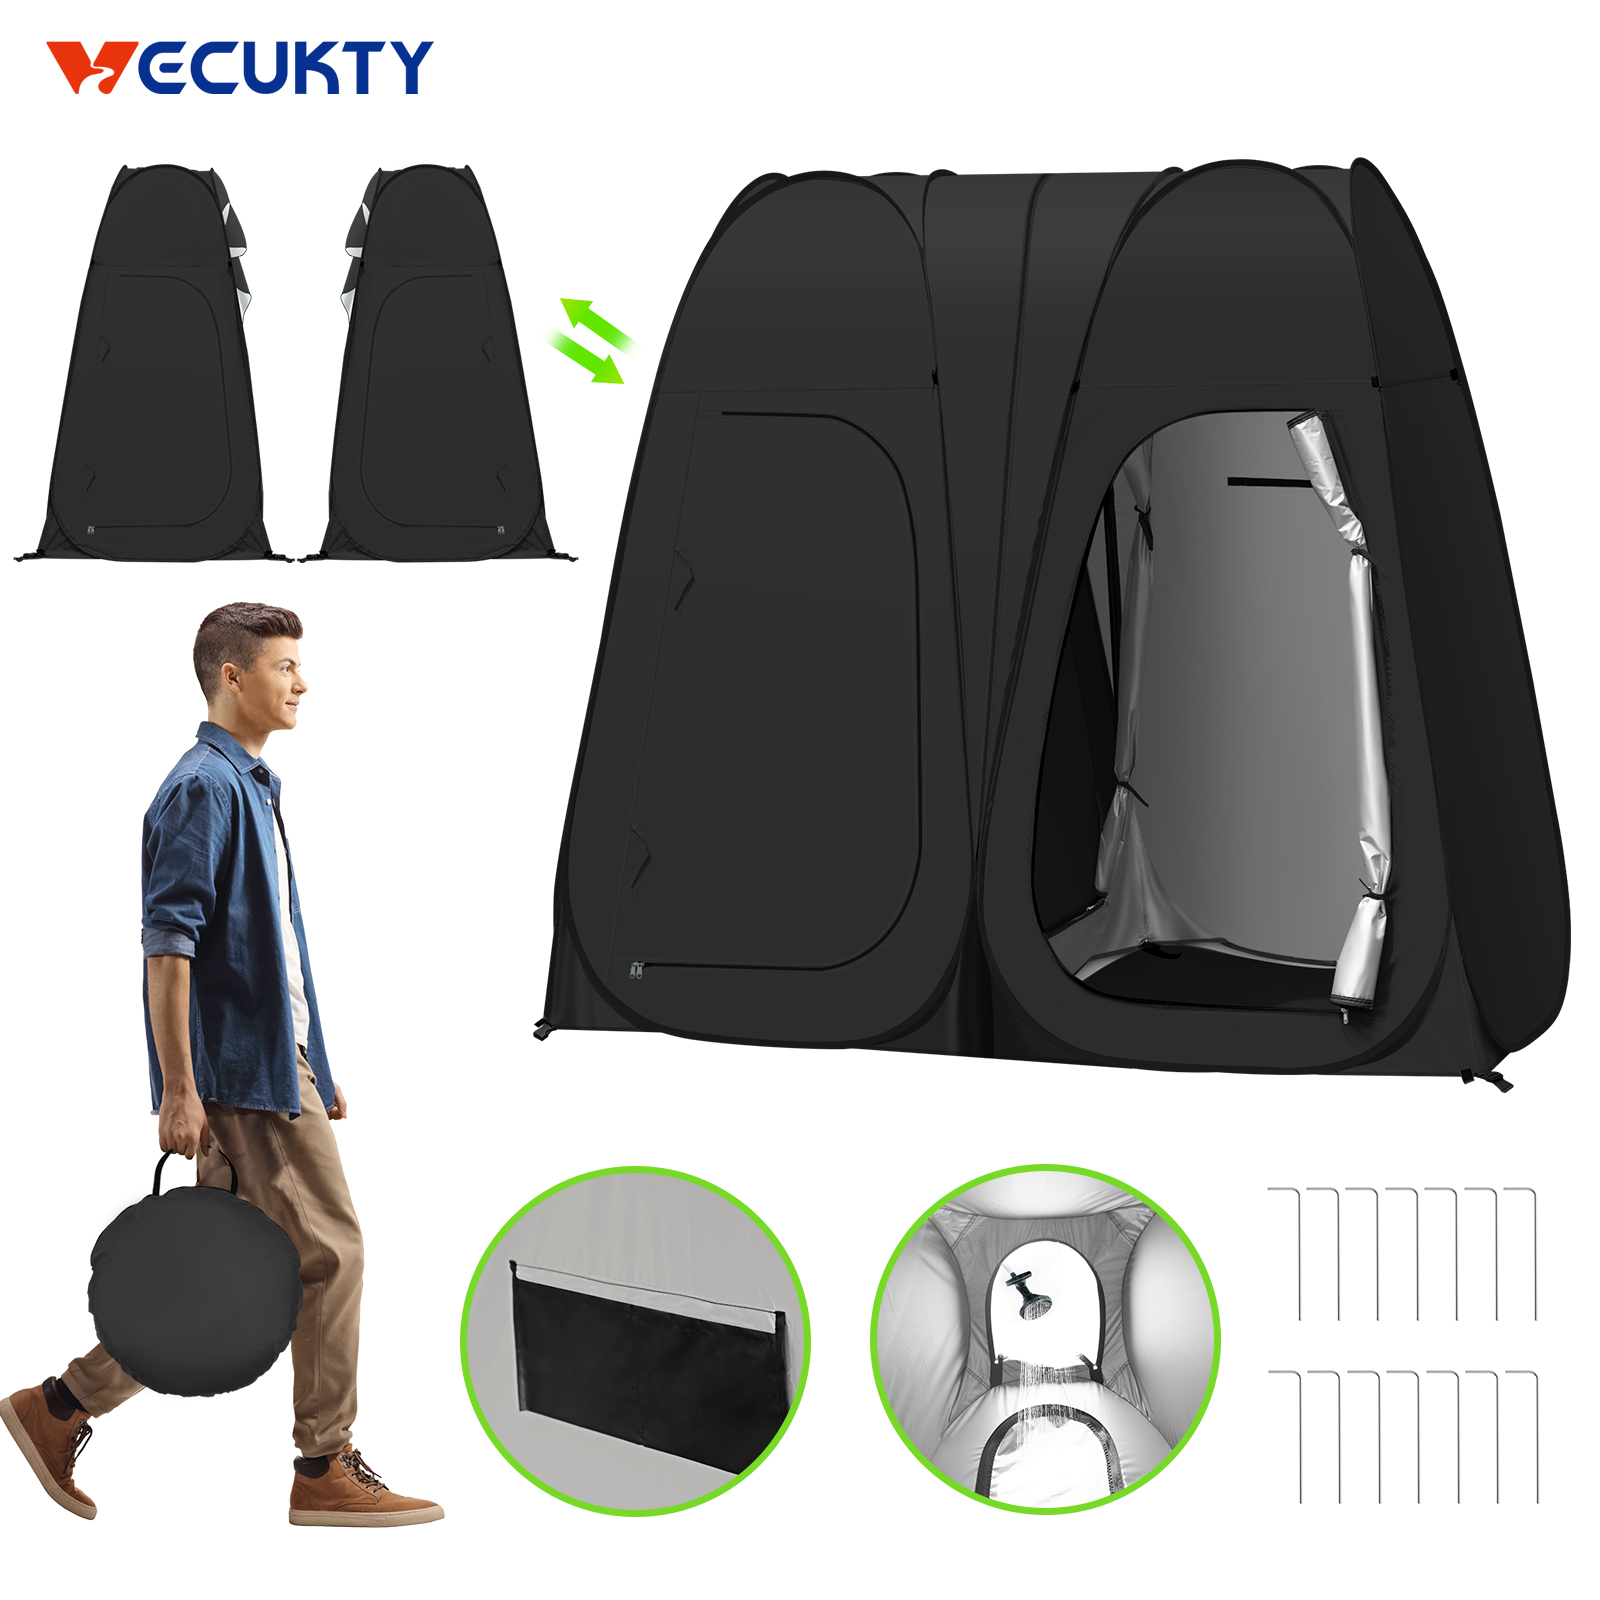 Camping Shower and Utility Tent, VECUKTY Portable Pop Up Camping Privacy Shelter with Floor, Changing Tent Dressing Room, Camping Toilet, Bathing Tent ,Fishing Rain Shelter for Beach - image 1 of 13